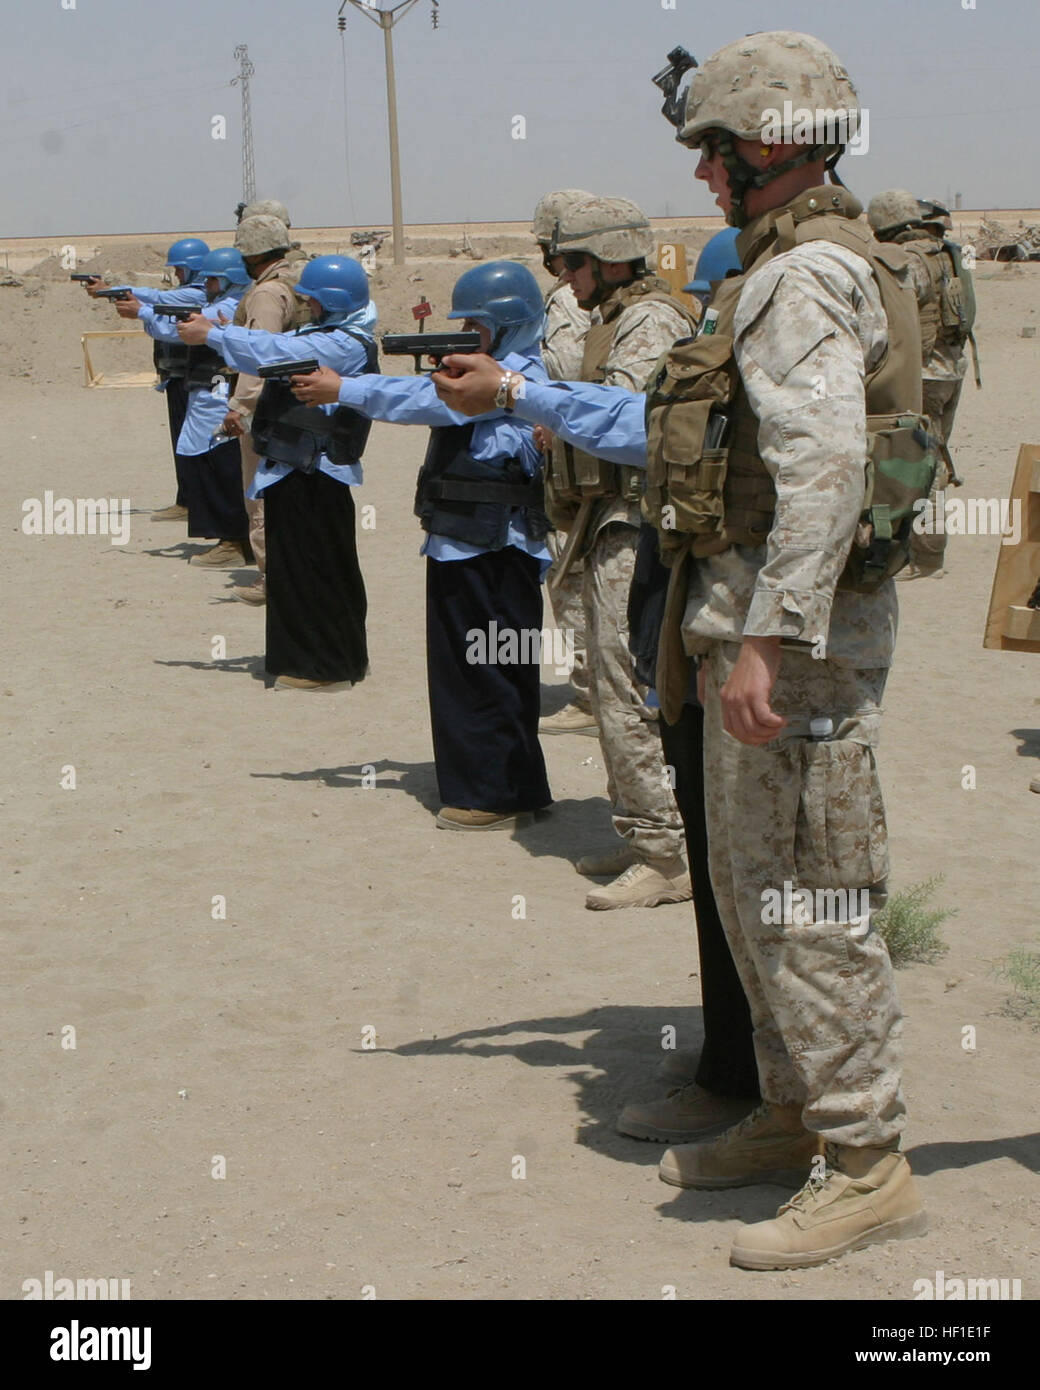 U.S. Marine Cpl. Roberts, 2nd Battalion, 5th Marines [2-5], 3rd Infantry Division, II Marine Expeditionary Force, coaches a female police officer during dry fire drills at the pistol range Joint Security Station Iron in Al Ramadi, Iraq, July 28. The female officers are being trained by fellow police officers of South Ramadi and U.S. Marines with 2nd Battalion, 5th Marines [2-5], 3rd Infantry Division, II Marine Expeditionary Force. The unit is deployed with Multi-National Forces-West in support of Operation Iraqi Freedom in the Al Anbar province of Iraq to develop Iraqi security forces, facili Stock Photo